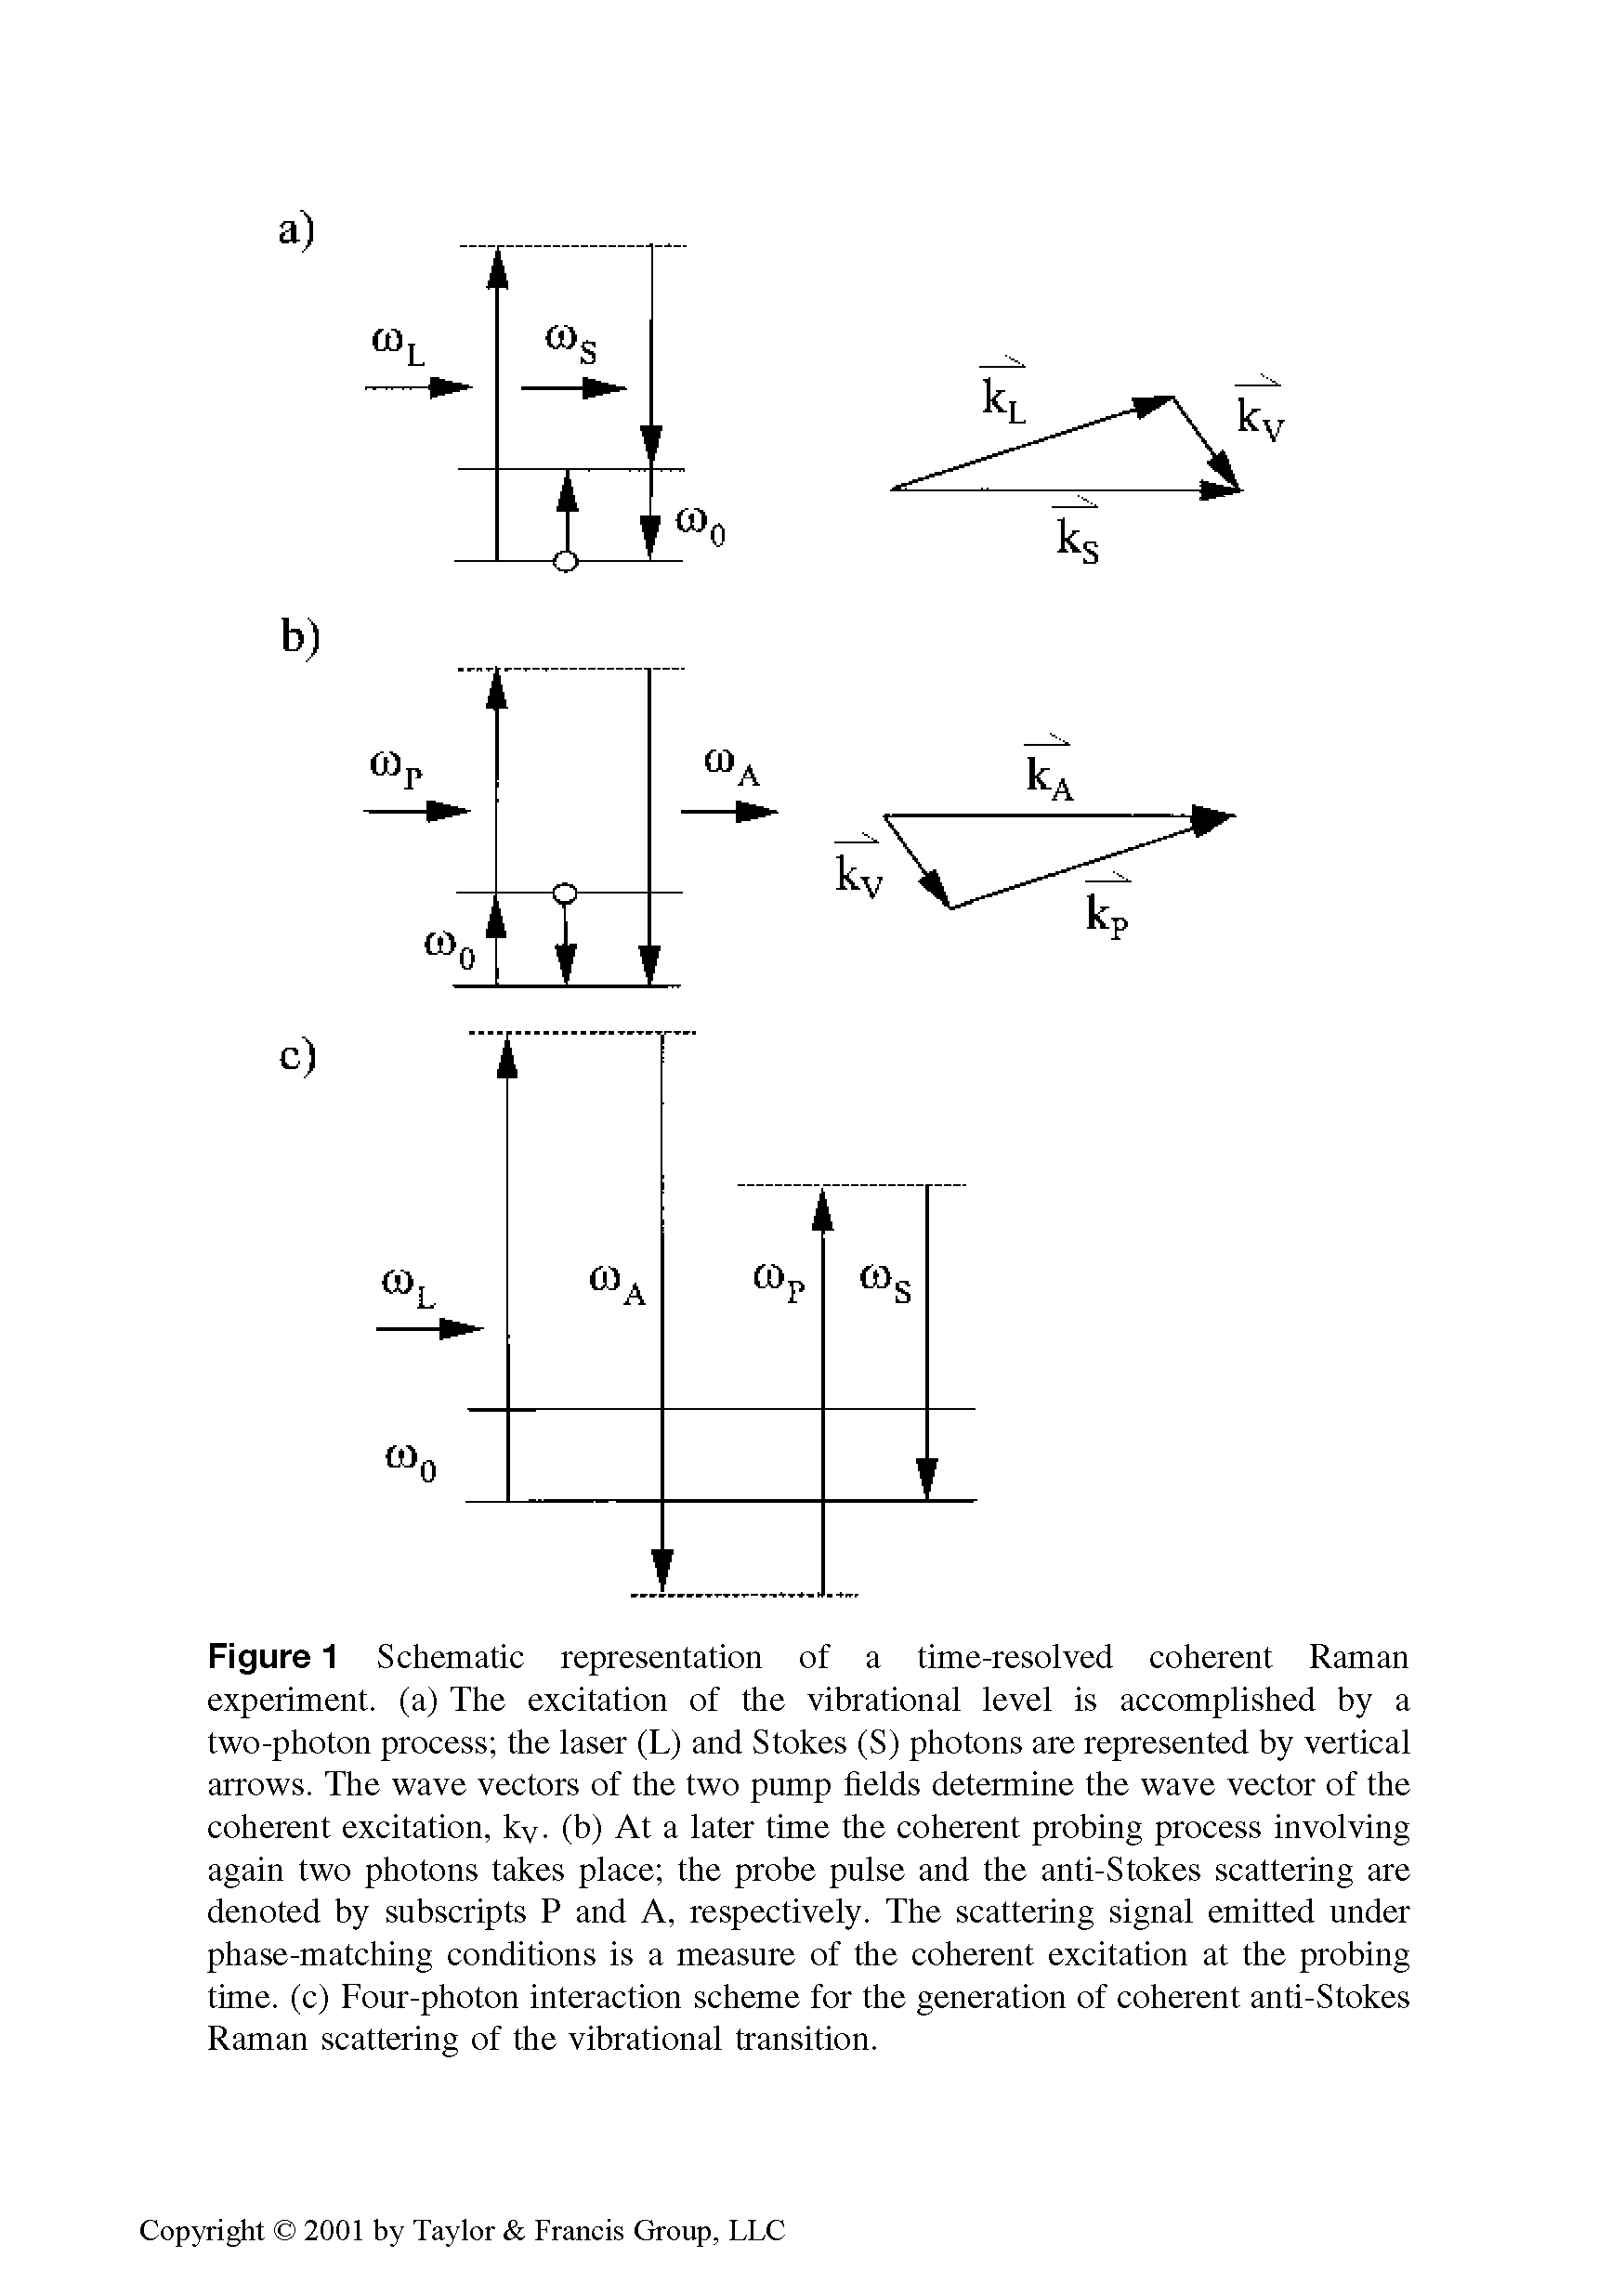 Figure 1 Schematic representation of a time-resolved coherent Raman experiment, (a) The excitation of the vibrational level is accomplished by a two-photon process the laser (L) and Stokes (S) photons are represented by vertical arrows. The wave vectors of the two pump fields determine the wave vector of the coherent excitation, kv. (b) At a later time the coherent probing process involving again two photons takes place the probe pulse and the anti-Stokes scattering are denoted by subscripts P and A, respectively. The scattering signal emitted under phase-matching conditions is a measure of the coherent excitation at the probing time, (c) Four-photon interaction scheme for the generation of coherent anti-Stokes Raman scattering of the vibrational transition.